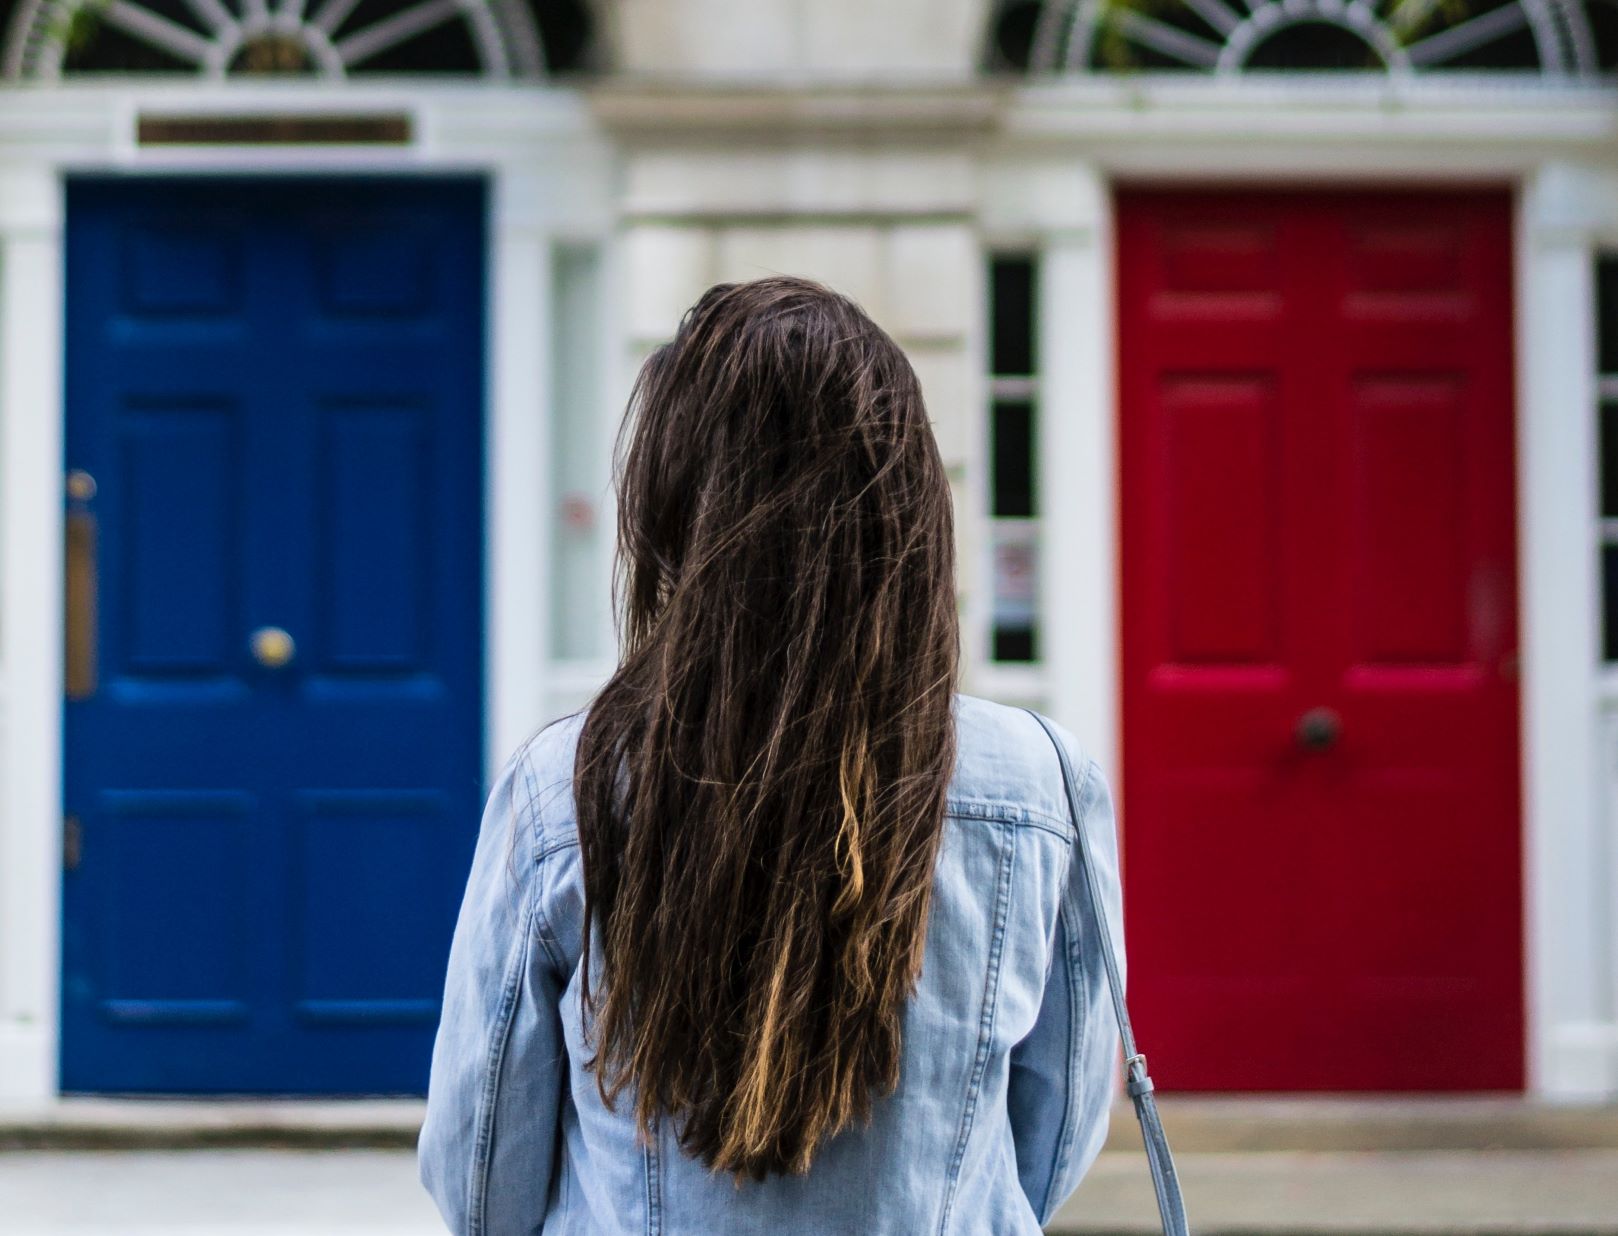 Woman with dark brown hair has her back to the camera. She's wearing a jean jacket trying to decide if she should go through the blue door on the left or the red door on the right.